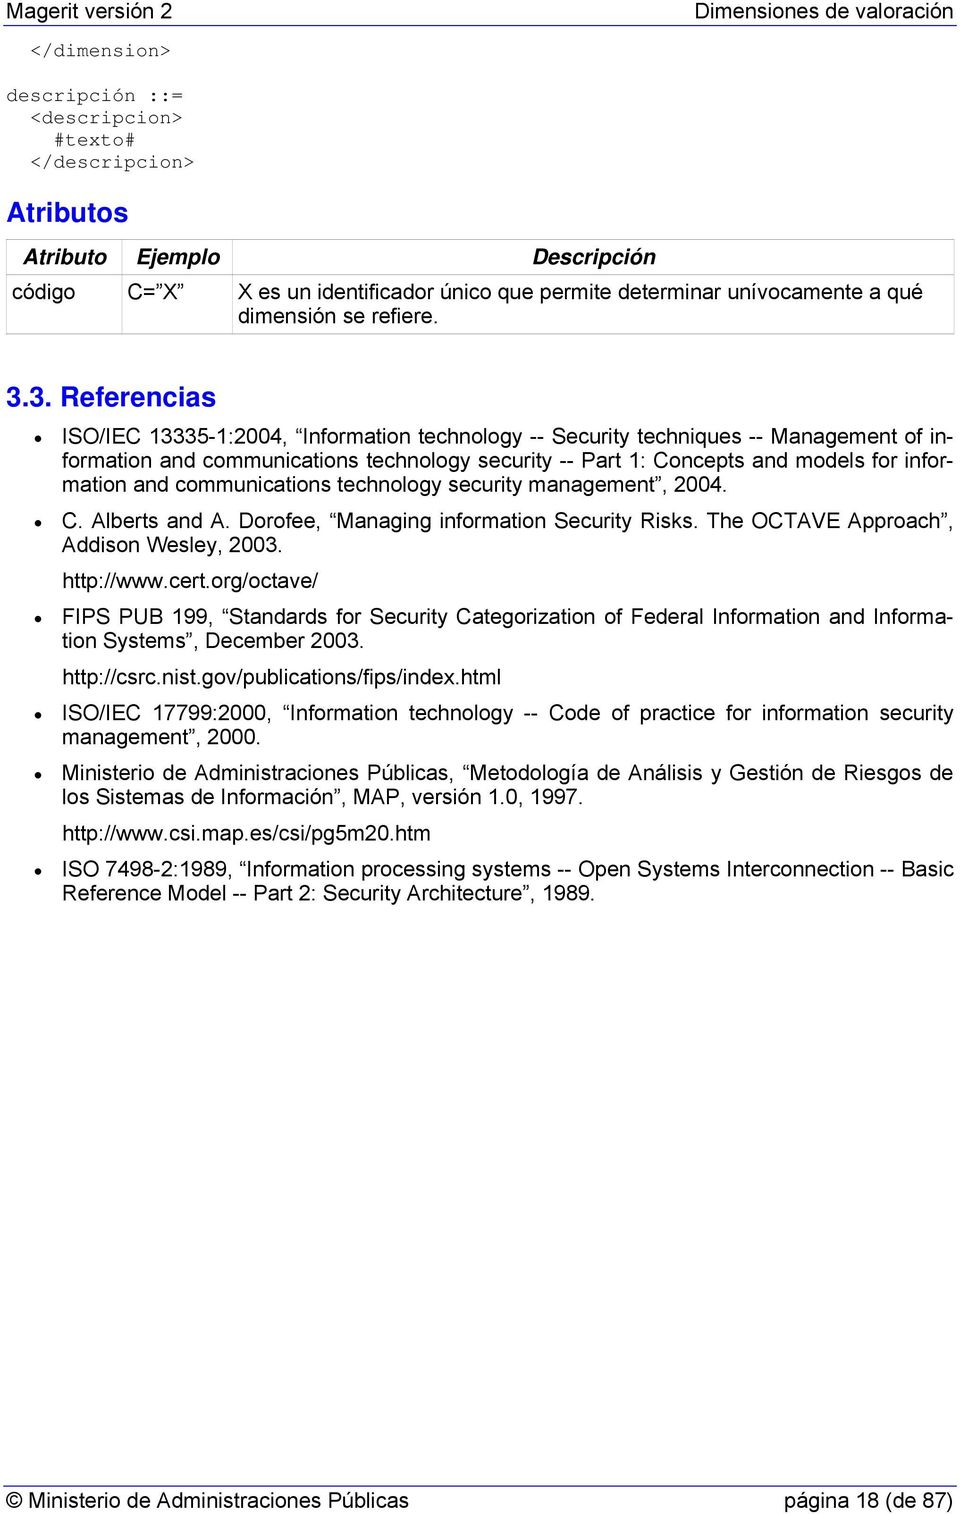 3. Referencias ISO/IEC 13335-1:2004, Information technology -- Security techniques -- Management of information and communications technology security -- Part 1: Concepts and models for information